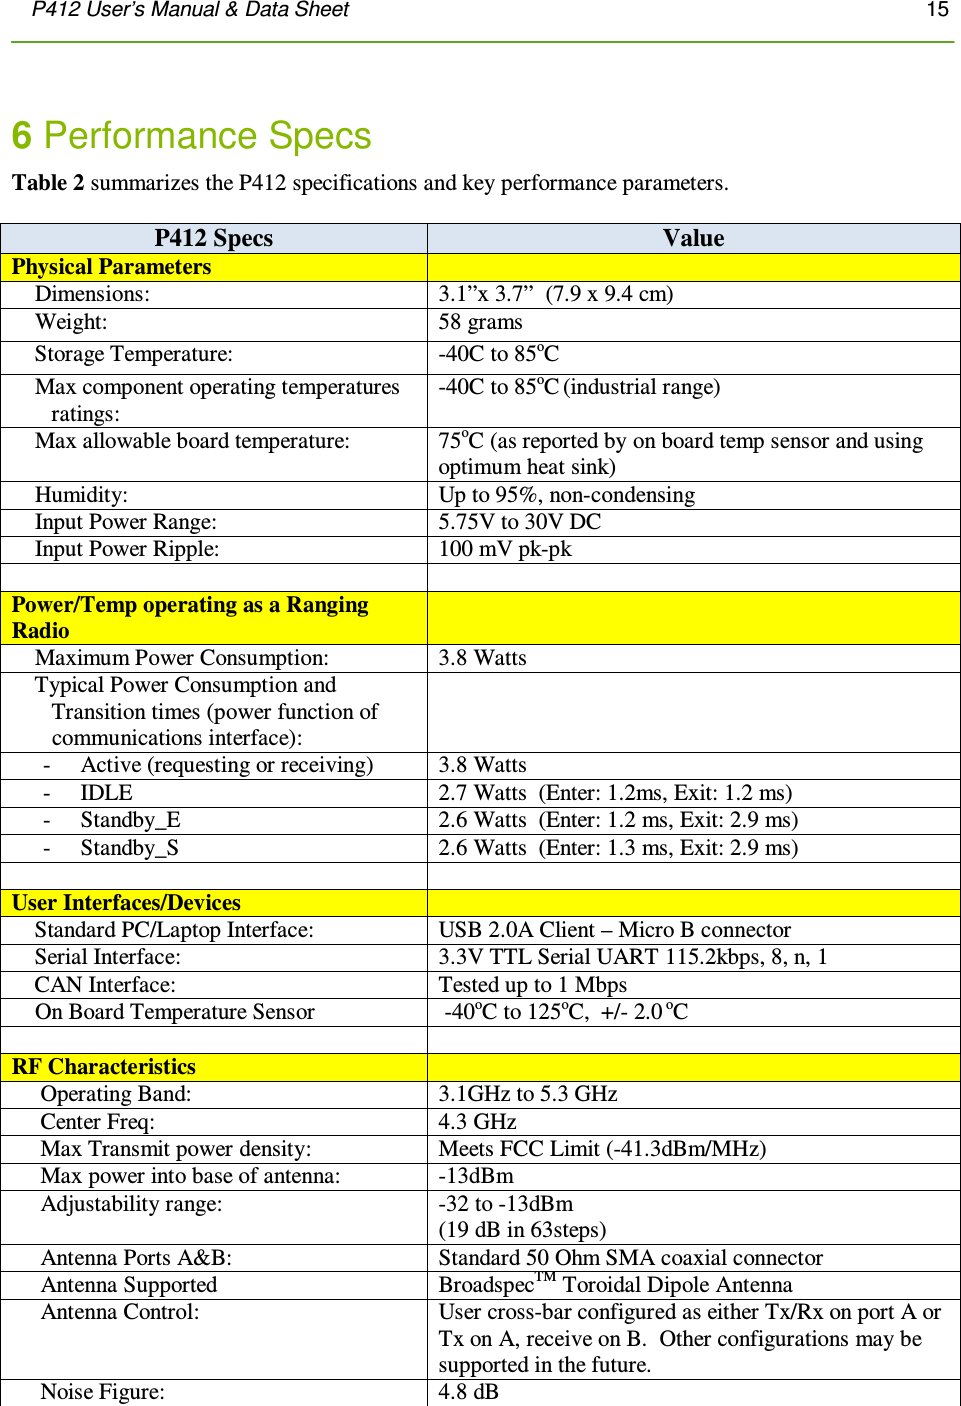 P412 User’s Manual &amp; Data Sheet       15       6 Performance Specs Table 2 summarizes the P412 specifications and key performance parameters.    P412 Specs  Value Physical Parameters      Dimensions: 3.1”x 3.7”  (7.9 x 9.4 cm)     Weight: 58 grams     Storage Temperature: -40C to 85oC       Max component operating temperatures         ratings: -40C to 85oC (industrial range)     Max allowable board temperature: 75oC (as reported by on board temp sensor and using optimum heat sink)     Humidity: Up to 95%, non-condensing     Input Power Range: 5.75V to 30V DC     Input Power Ripple: 100 mV pk-pk   Power/Temp operating as a Ranging Radio      Maximum Power Consumption: 3.8 Watts     Typical Power Consumption and        Transition times (power function of         communications interface):  - Active (requesting or receiving) 3.8 Watts  - IDLE 2.7 Watts  (Enter: 1.2ms, Exit: 1.2 ms) - Standby_E 2.6 Watts  (Enter: 1.2 ms, Exit: 2.9 ms) - Standby_S 2.6 Watts  (Enter: 1.3 ms, Exit: 2.9 ms)   User Interfaces/Devices      Standard PC/Laptop Interface: USB 2.0A Client – Micro B connector     Serial Interface: 3.3V TTL Serial UART 115.2kbps, 8, n, 1     CAN Interface: Tested up to 1 Mbps     On Board Temperature Sensor  -40oC to 125oC,  +/- 2.0 oC   RF Characteristics       Operating Band: 3.1GHz to 5.3 GHz      Center Freq: 4.3 GHz      Max Transmit power density: Meets FCC Limit (-41.3dBm/MHz)      Max power into base of antenna: -13dBm      Adjustability range:  -32 to -13dBm (19 dB in 63steps)      Antenna Ports A&amp;B:  Standard 50 Ohm SMA coaxial connector      Antenna Supported BroadspecTM Toroidal Dipole Antenna      Antenna Control: User cross-bar configured as either Tx/Rx on port A or Tx on A, receive on B.  Other configurations may be supported in the future.       Noise Figure: 4.8 dB 